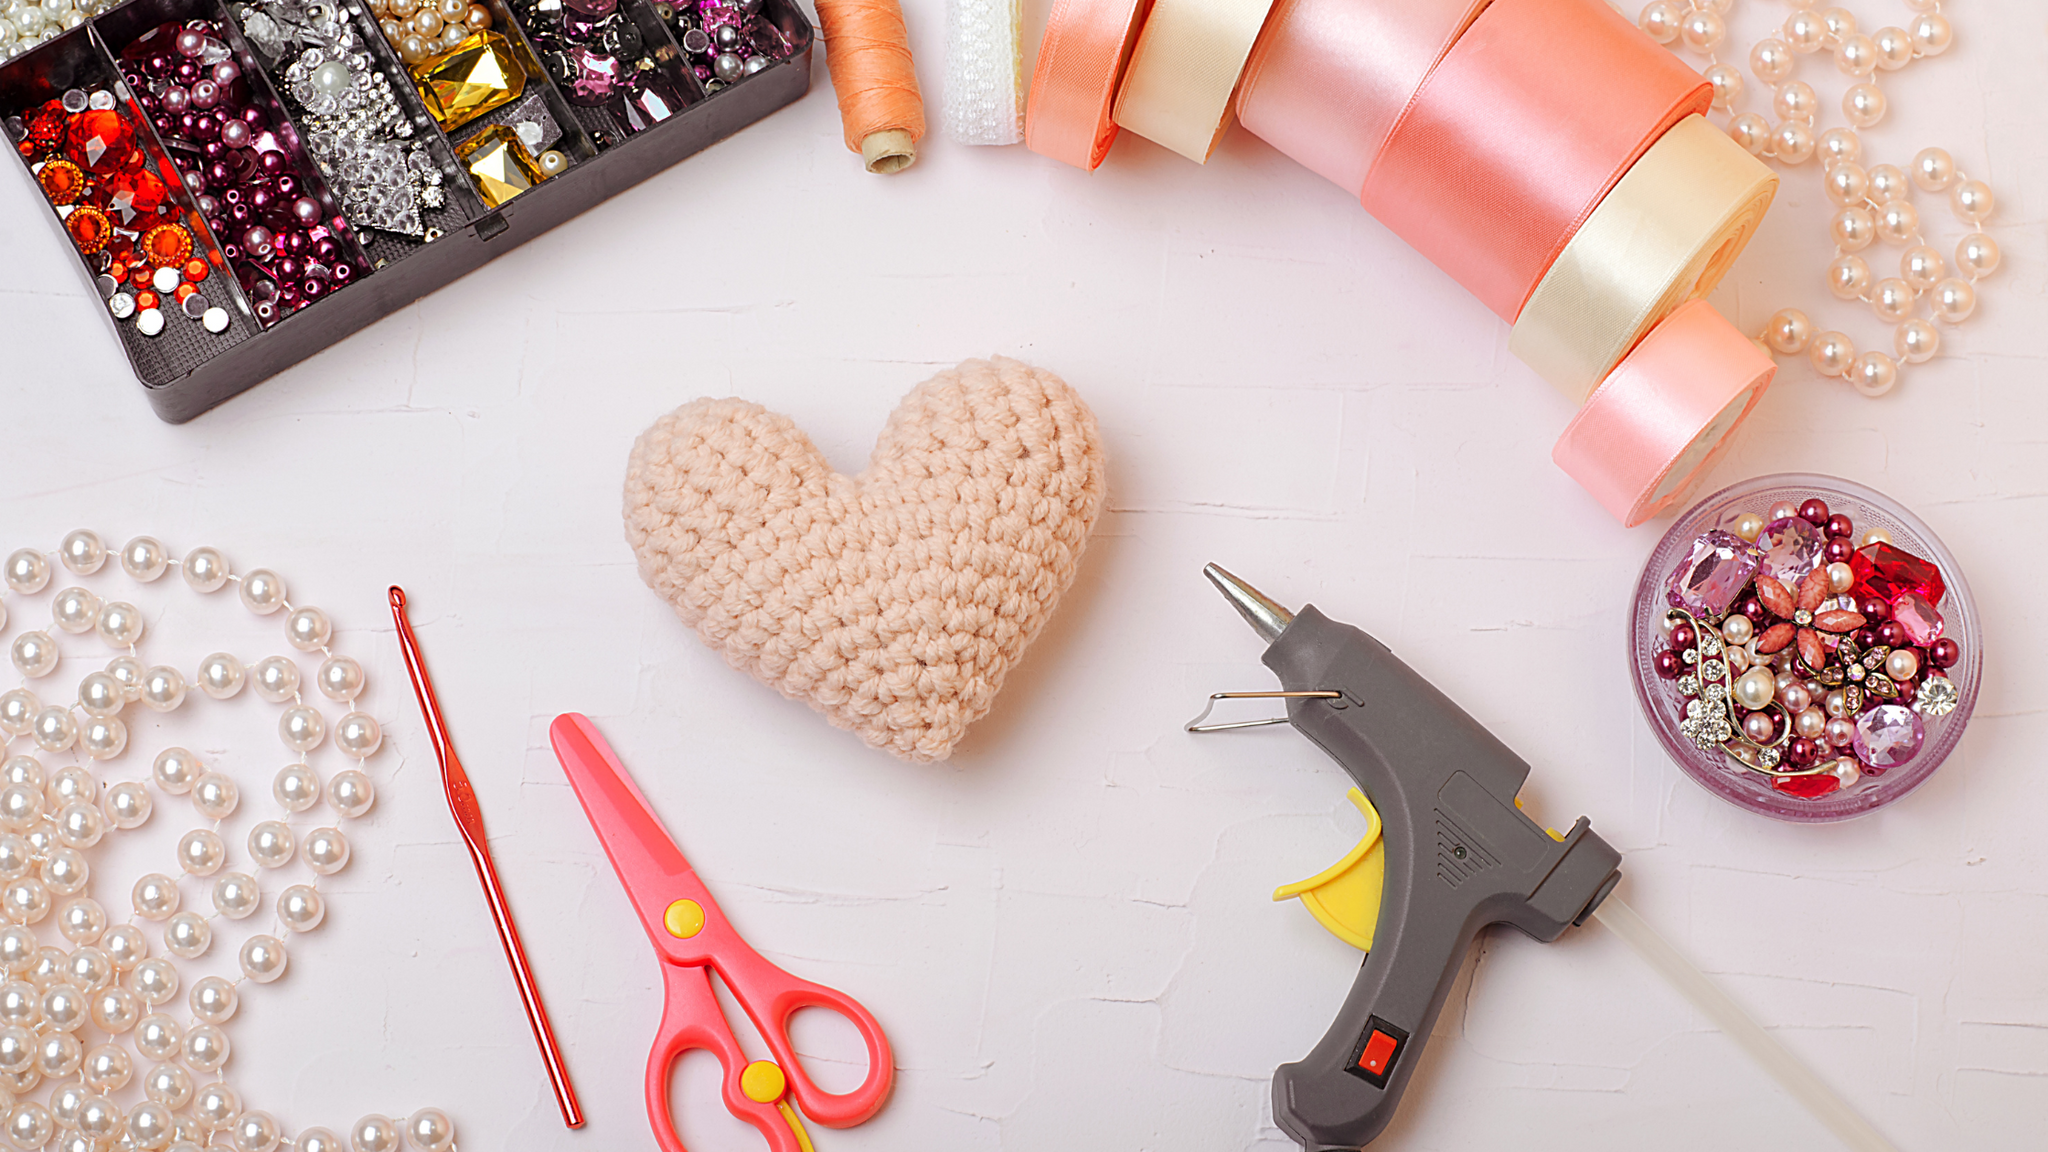 Crafting Magic: 10 DIY Projects for Budget-Friendly Creativity